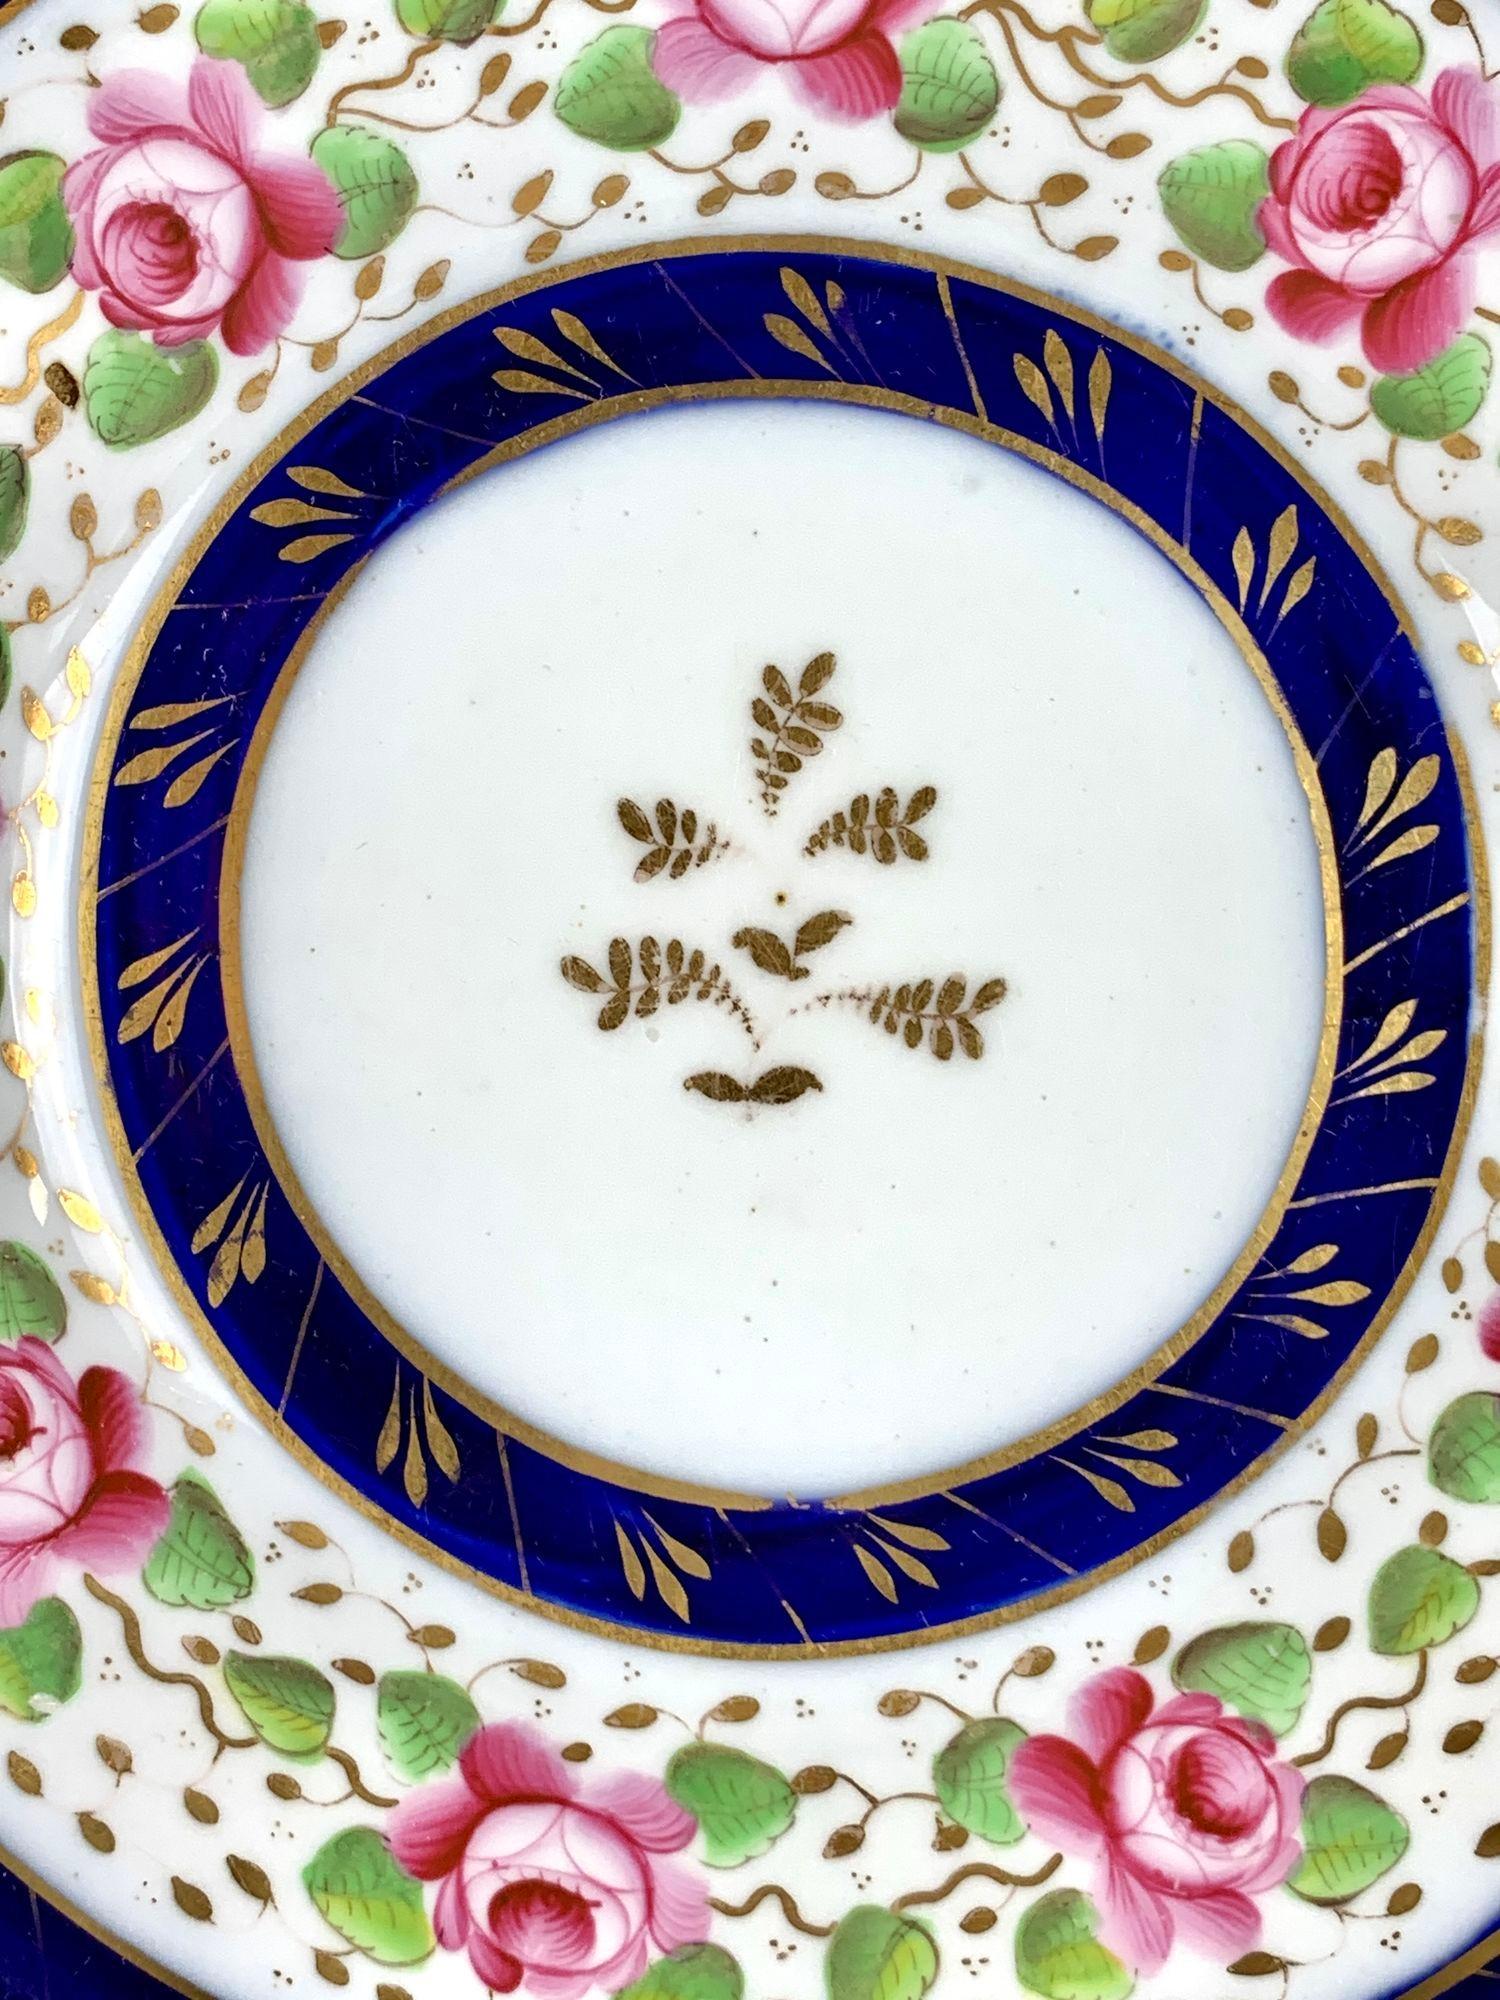 This exquisite antique porcelain saucer dish was hand painted at the renowned New Hall China Works in England circa 1810.
It is a piece of artistry that has gracefully withstood the test of time, carrying a rich history and a captivating story.
The